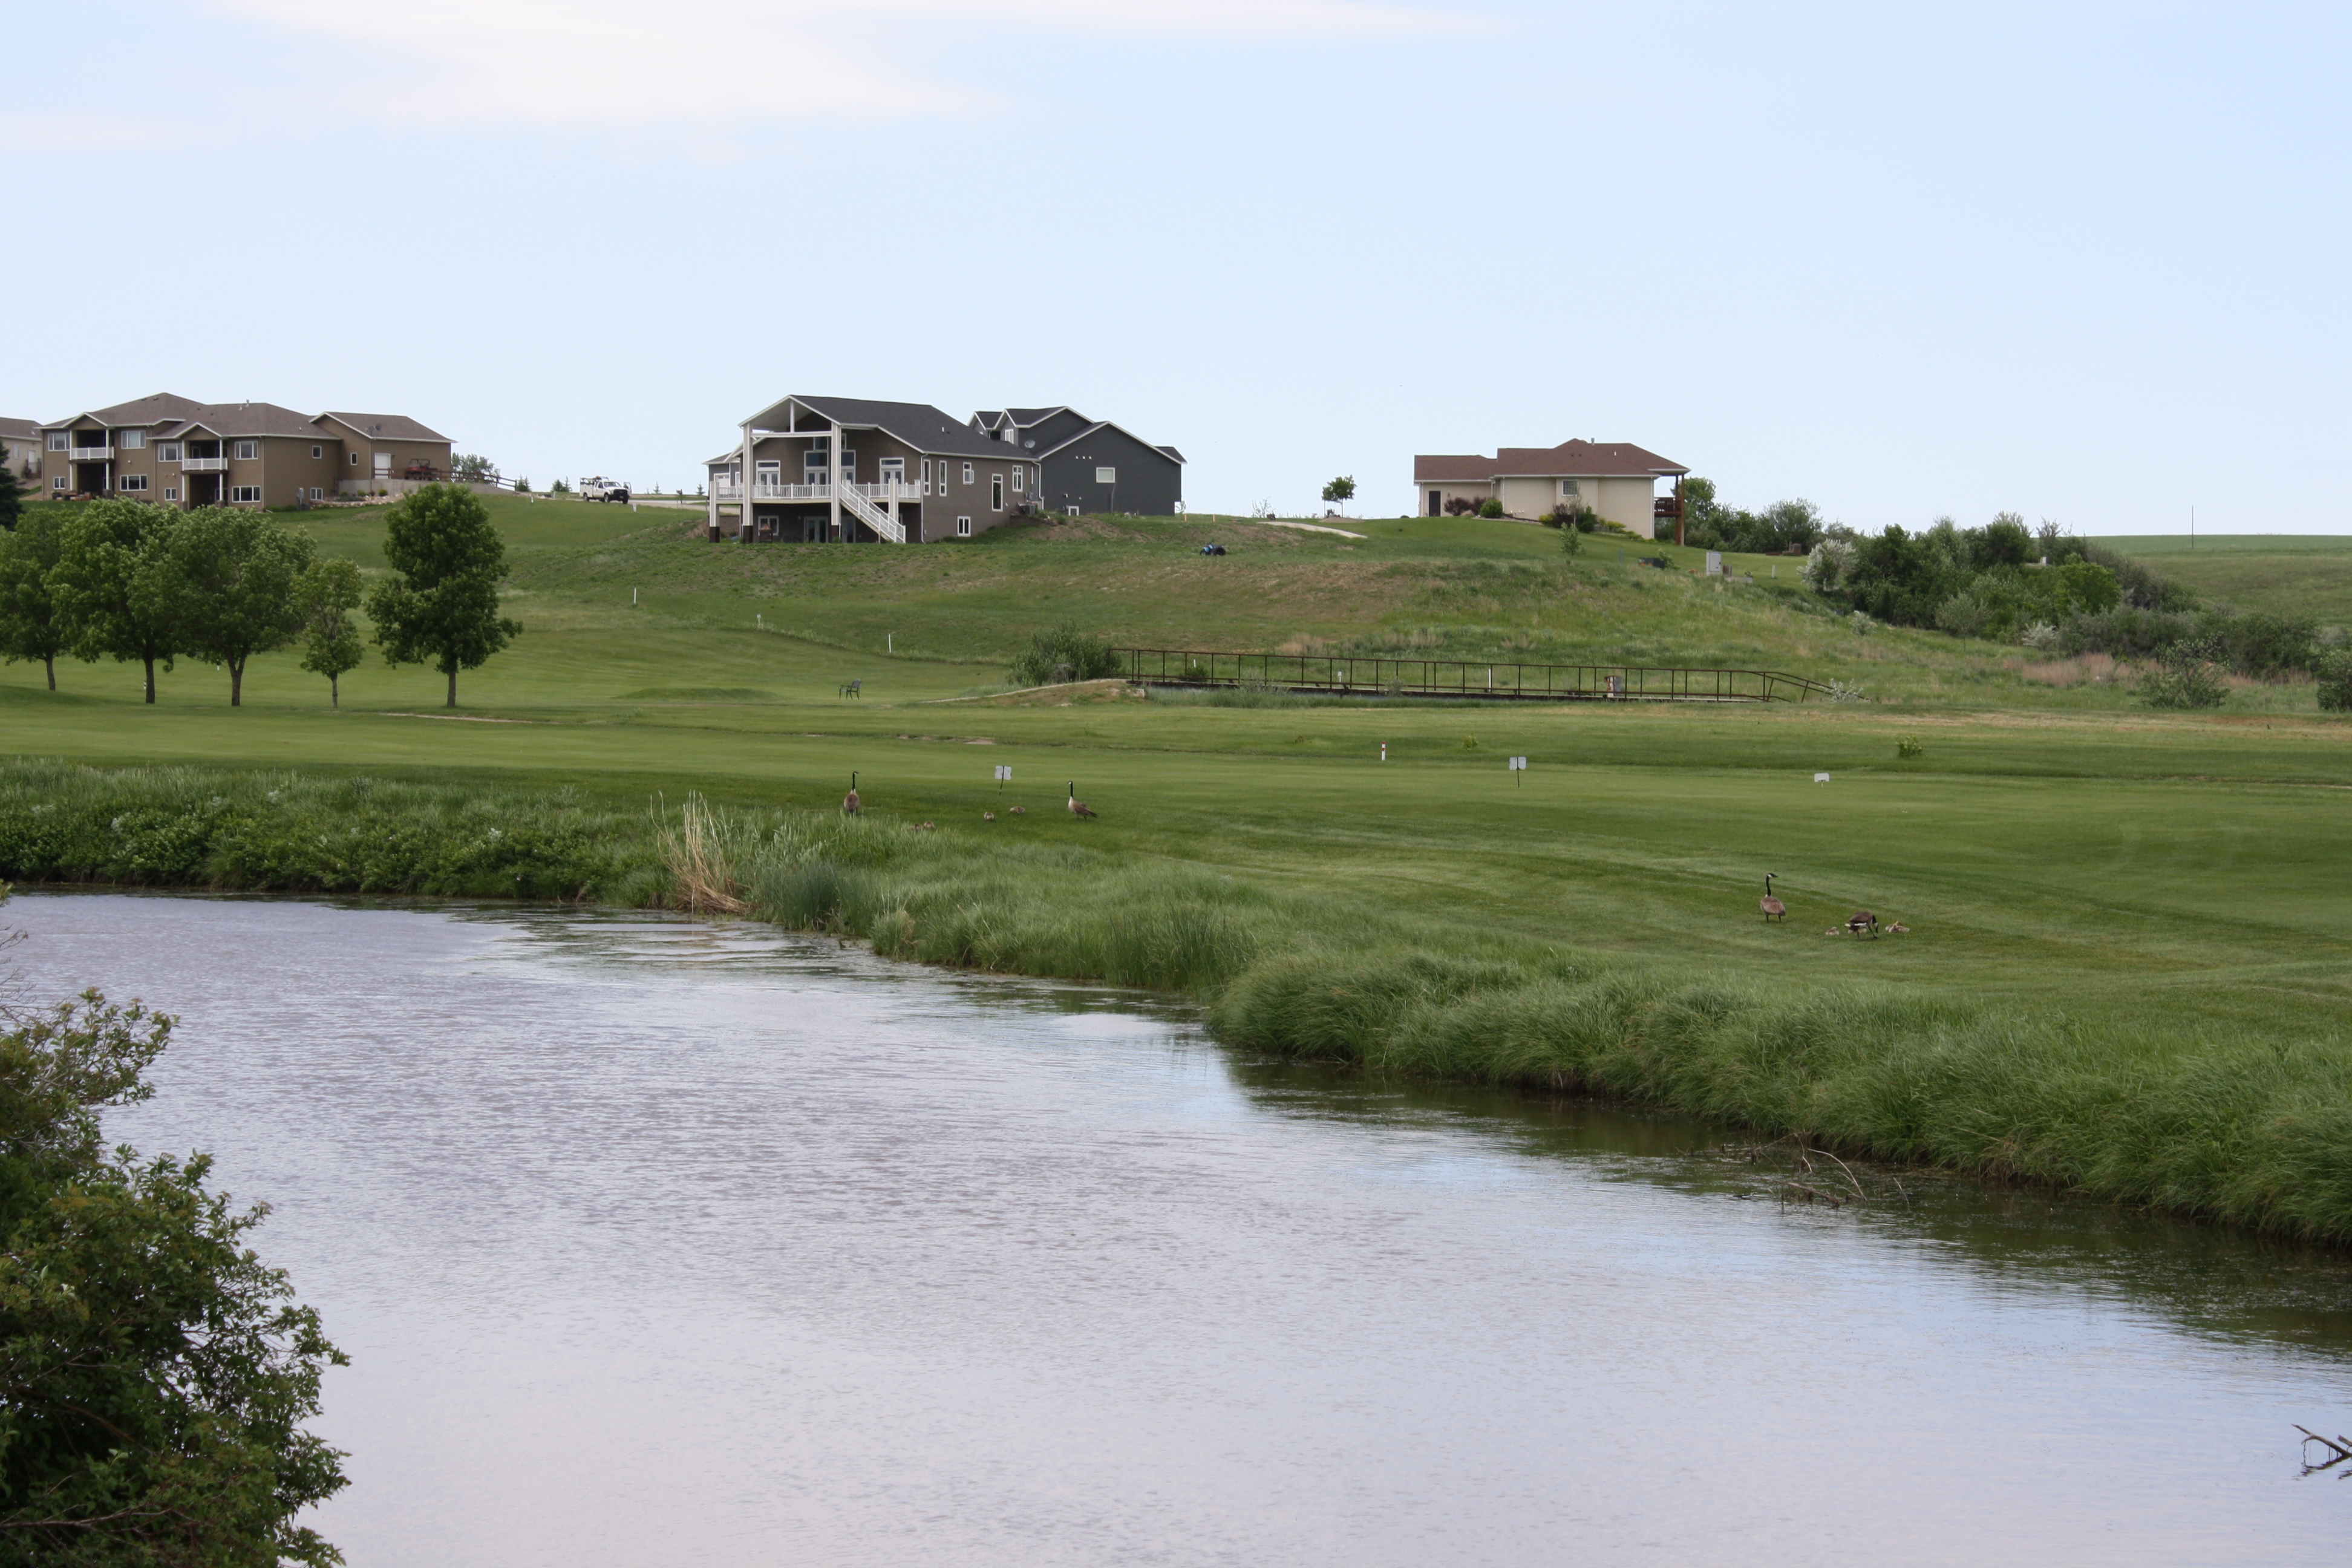 Homes along the Painted Woods Golf Course near Washburn ND